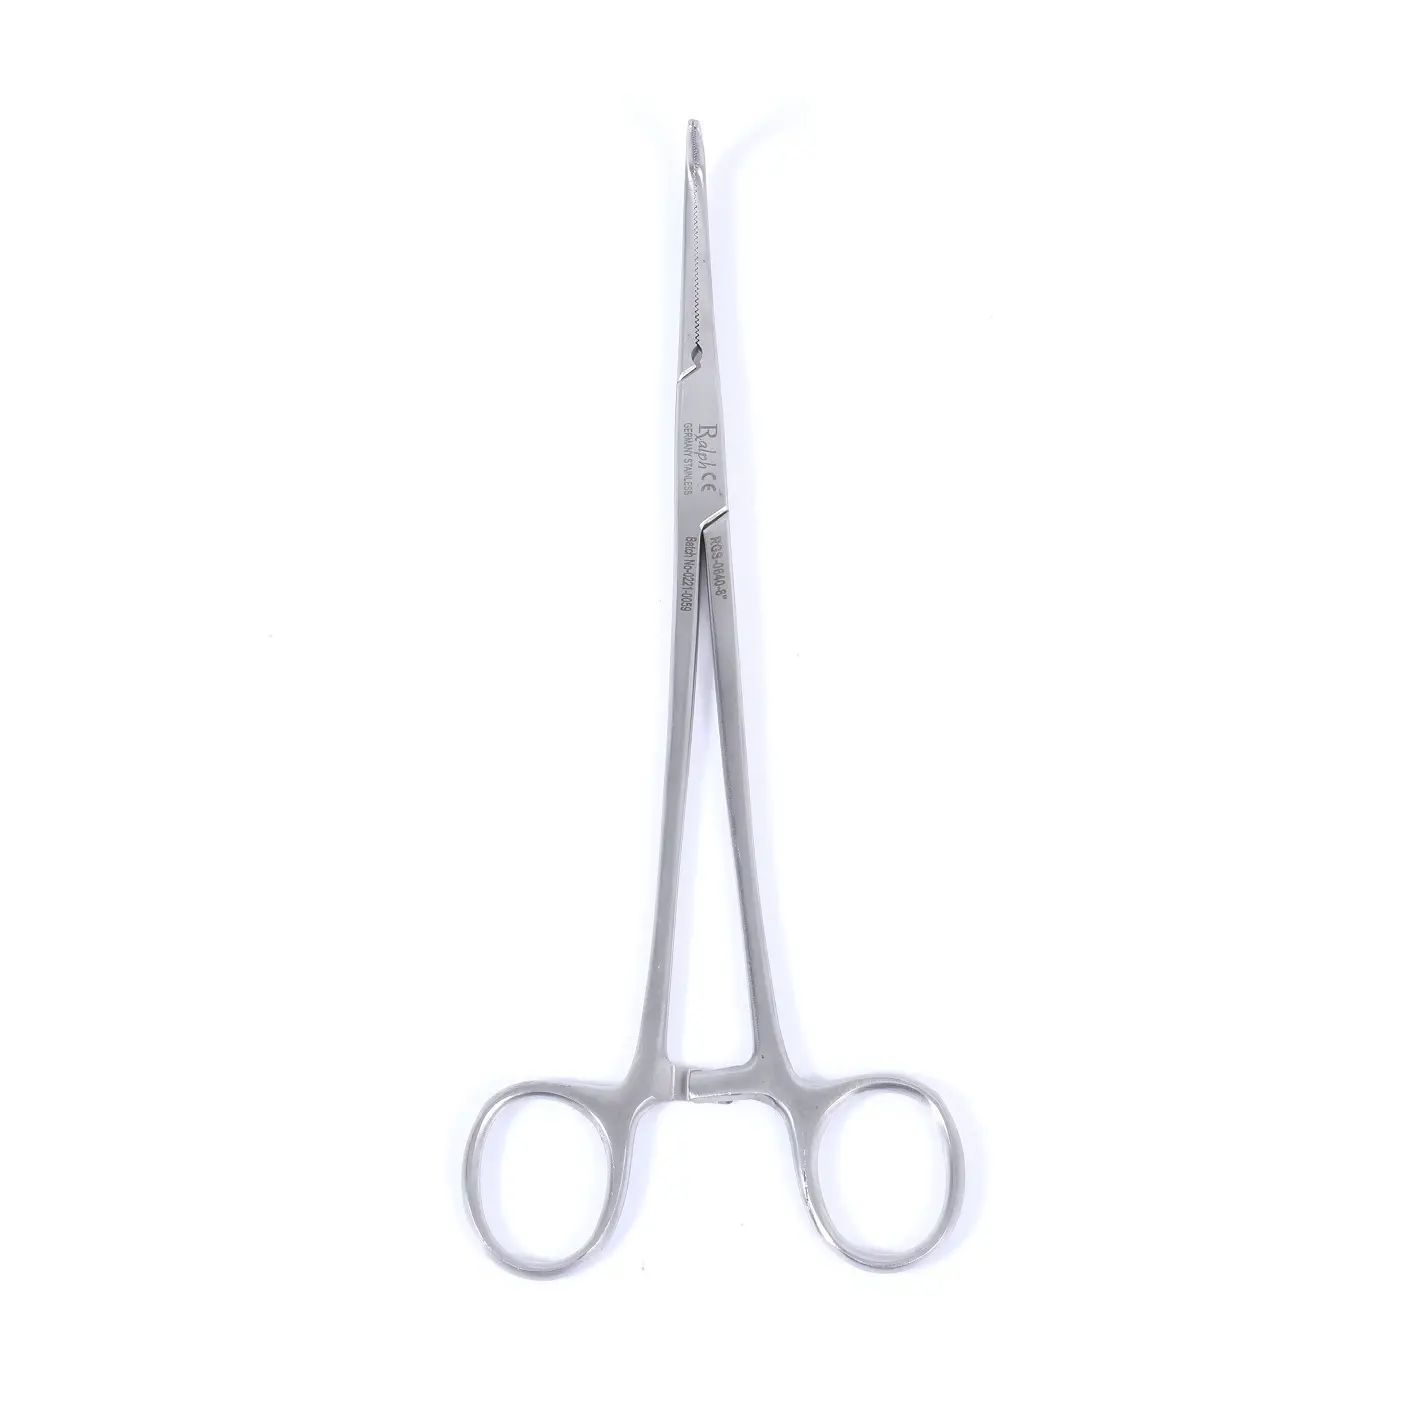 Best Selling Medical Equipment Kantrowitz Right Angled Forceps 8" Available at Wholesale Price from Indian Exporter